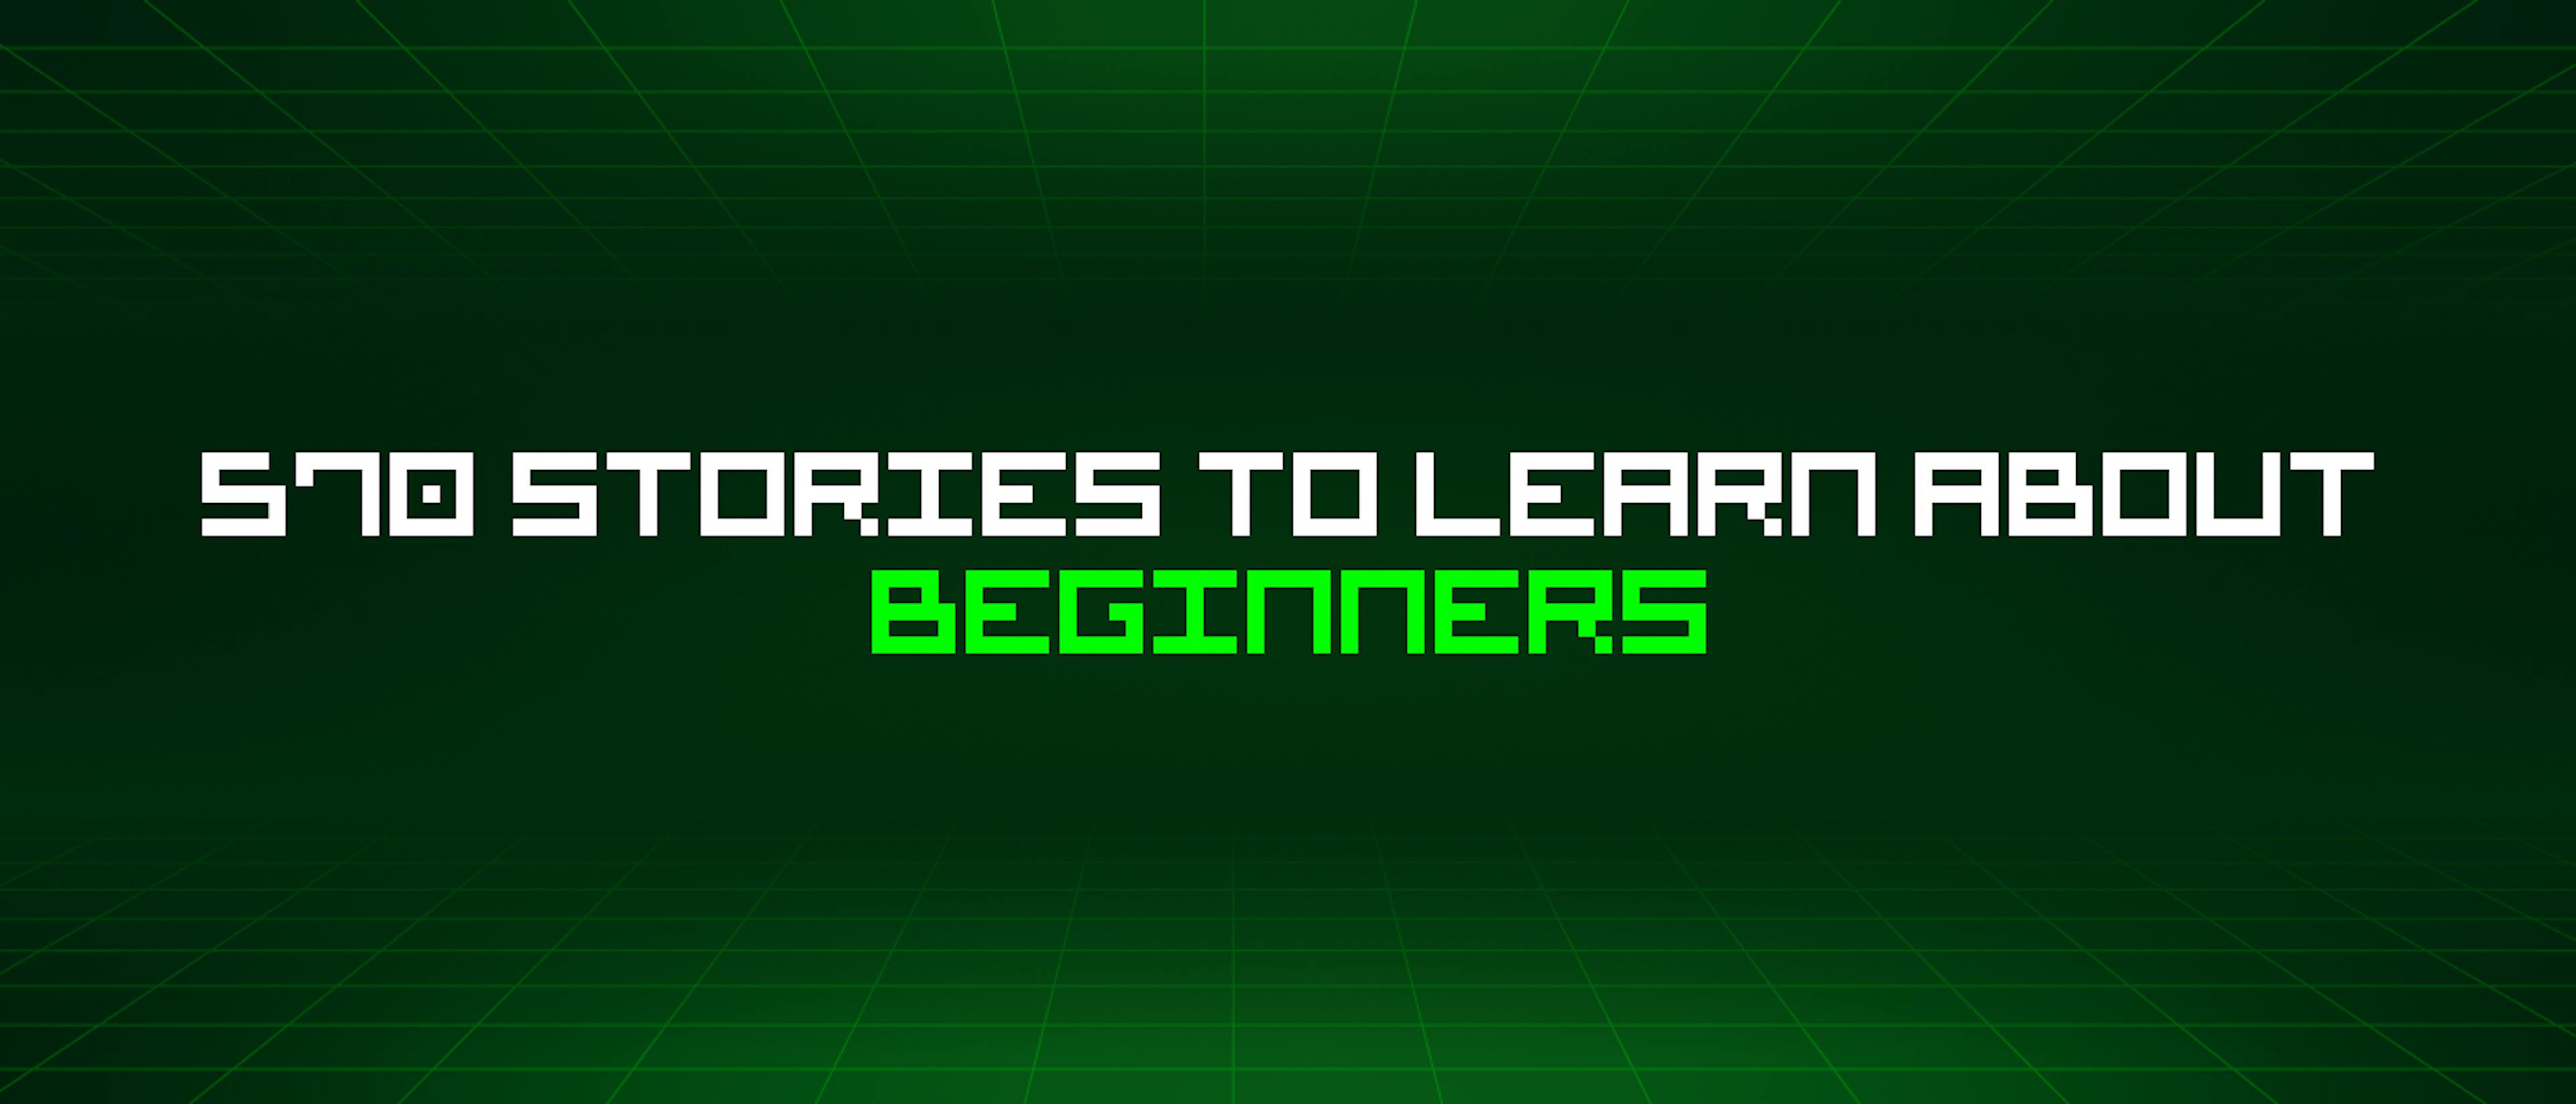 featured image - 570 Stories To Learn About Beginners